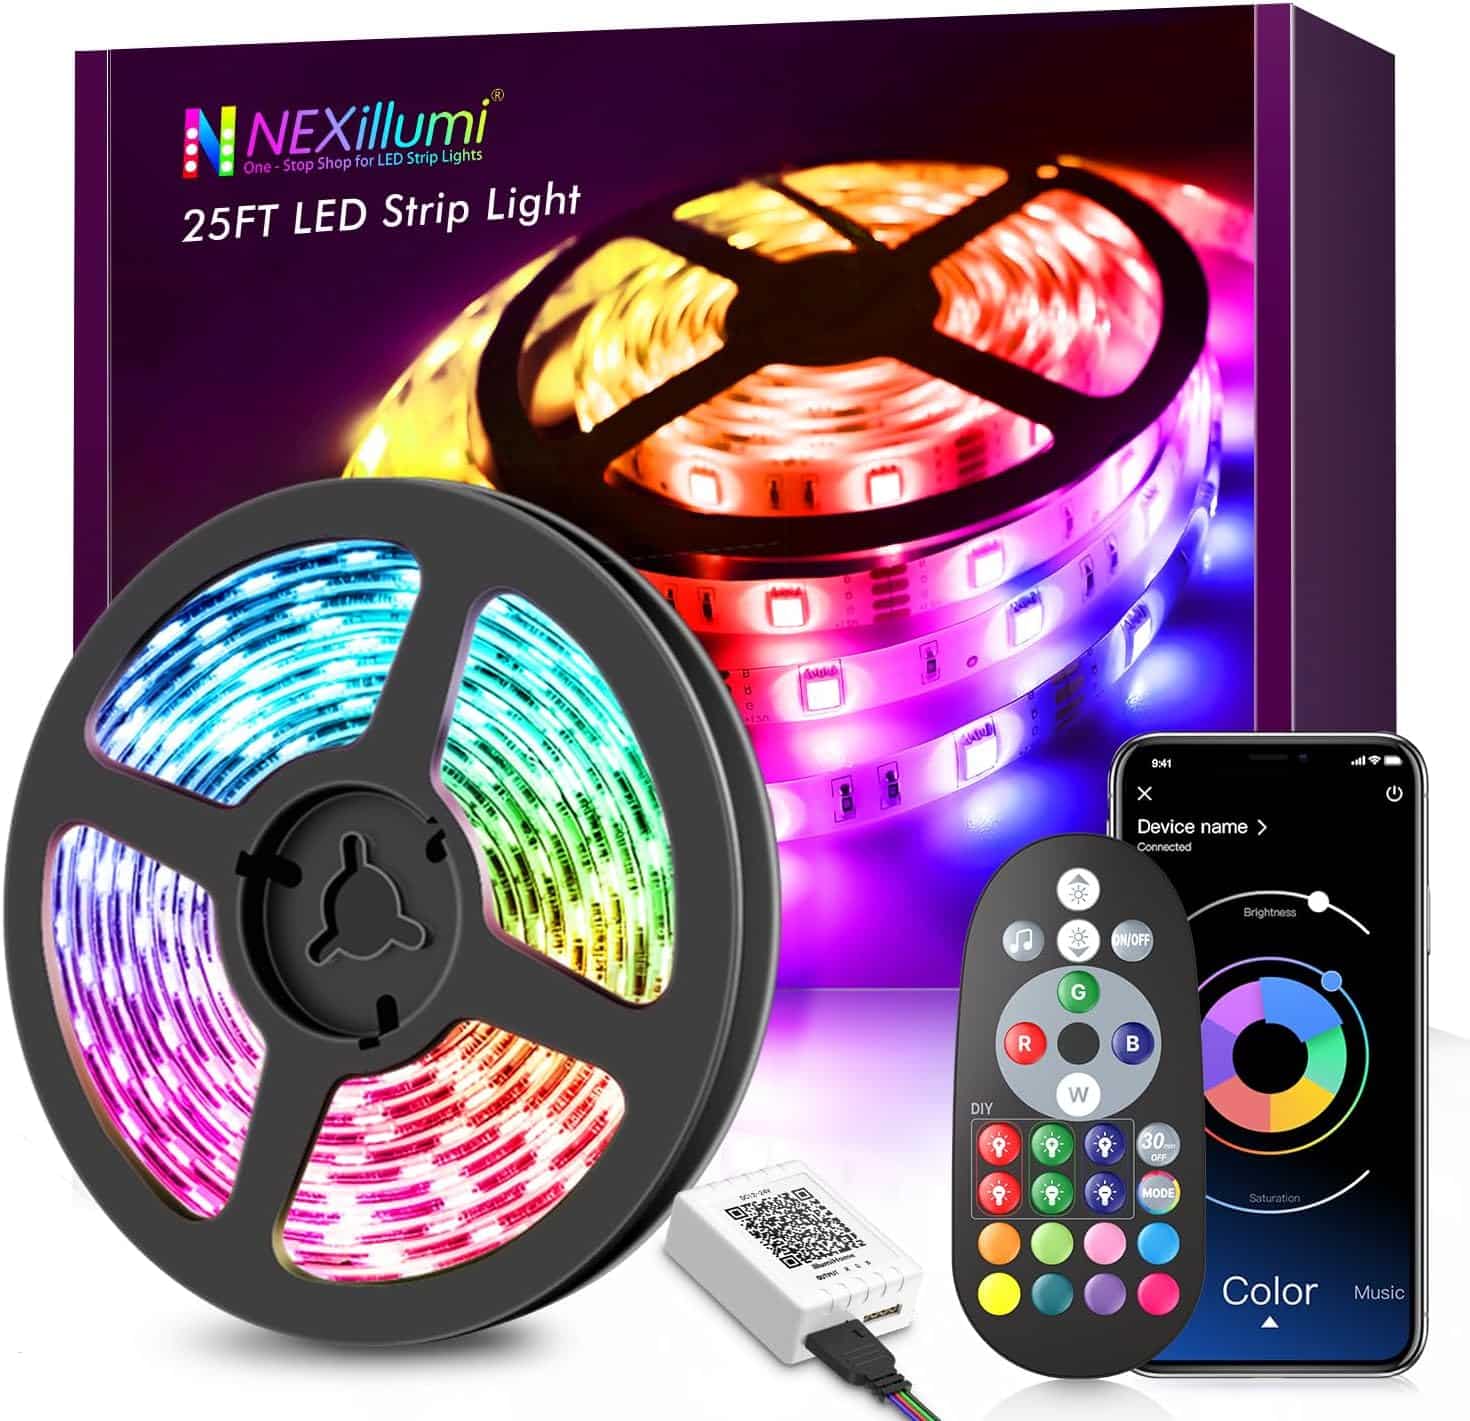 NEXillumi 25ft LED Strip Lights, APP Control Music Sync Color Changing LED Light Strip, SMD 5050 RGB LED Tape Lights with IR Remote (APP+Remote+Mic+3-Button Switch).